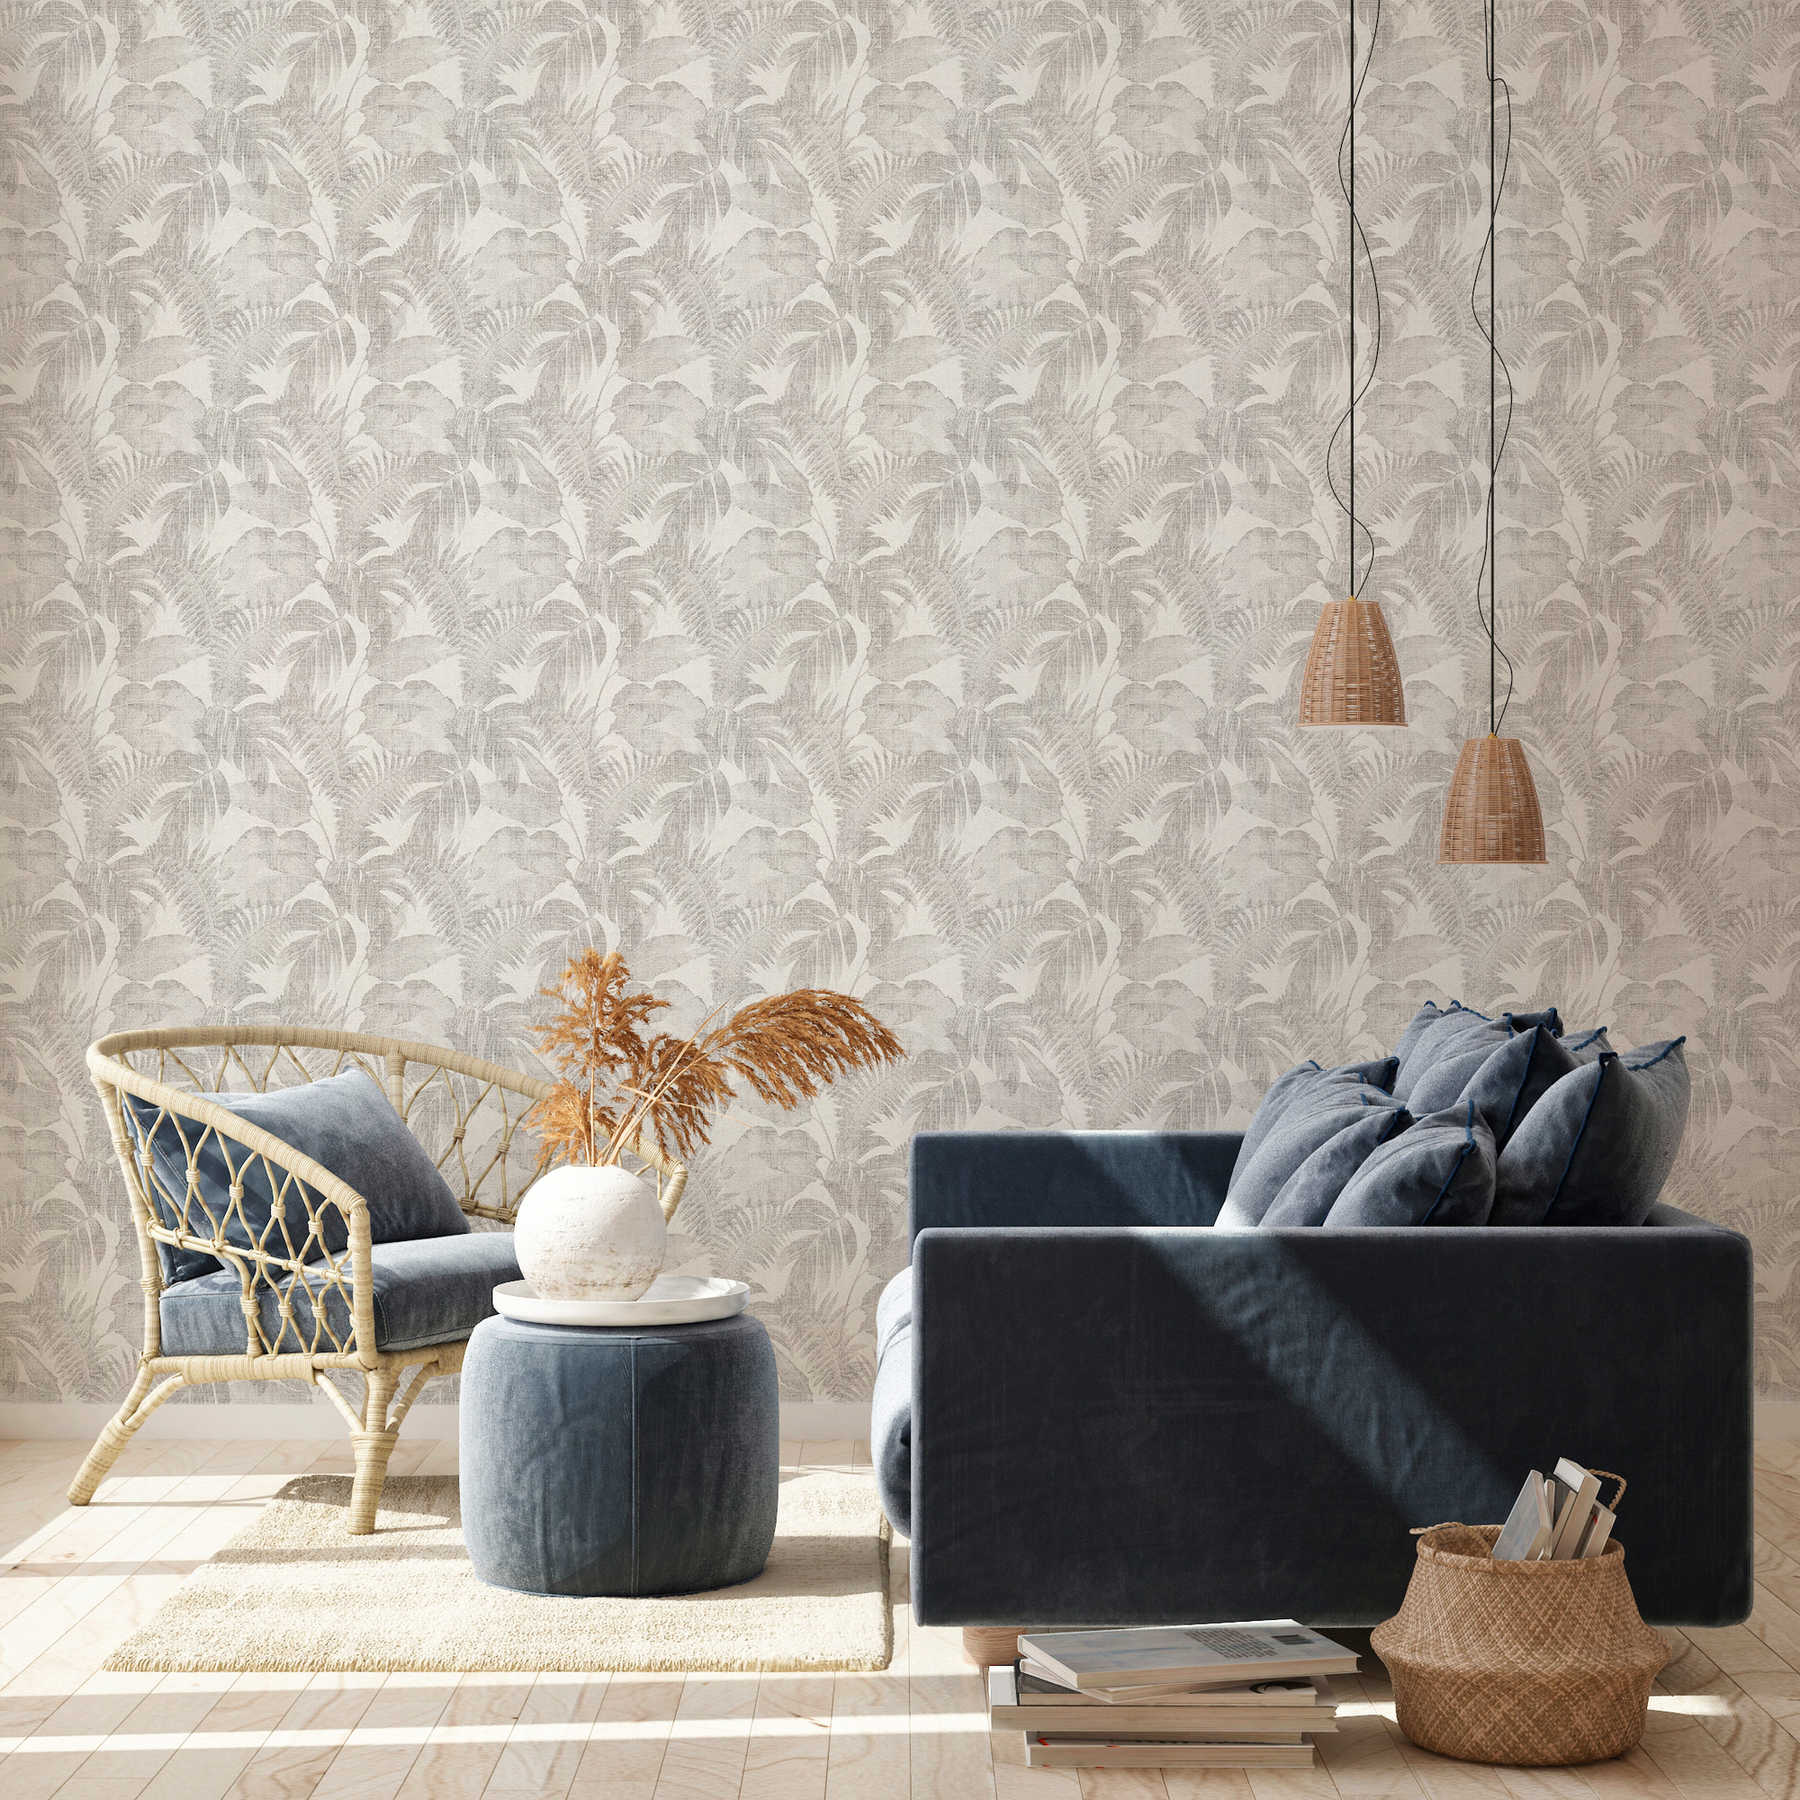             Boho jungle wallpaper with linen look - taupe, cream, beige
        